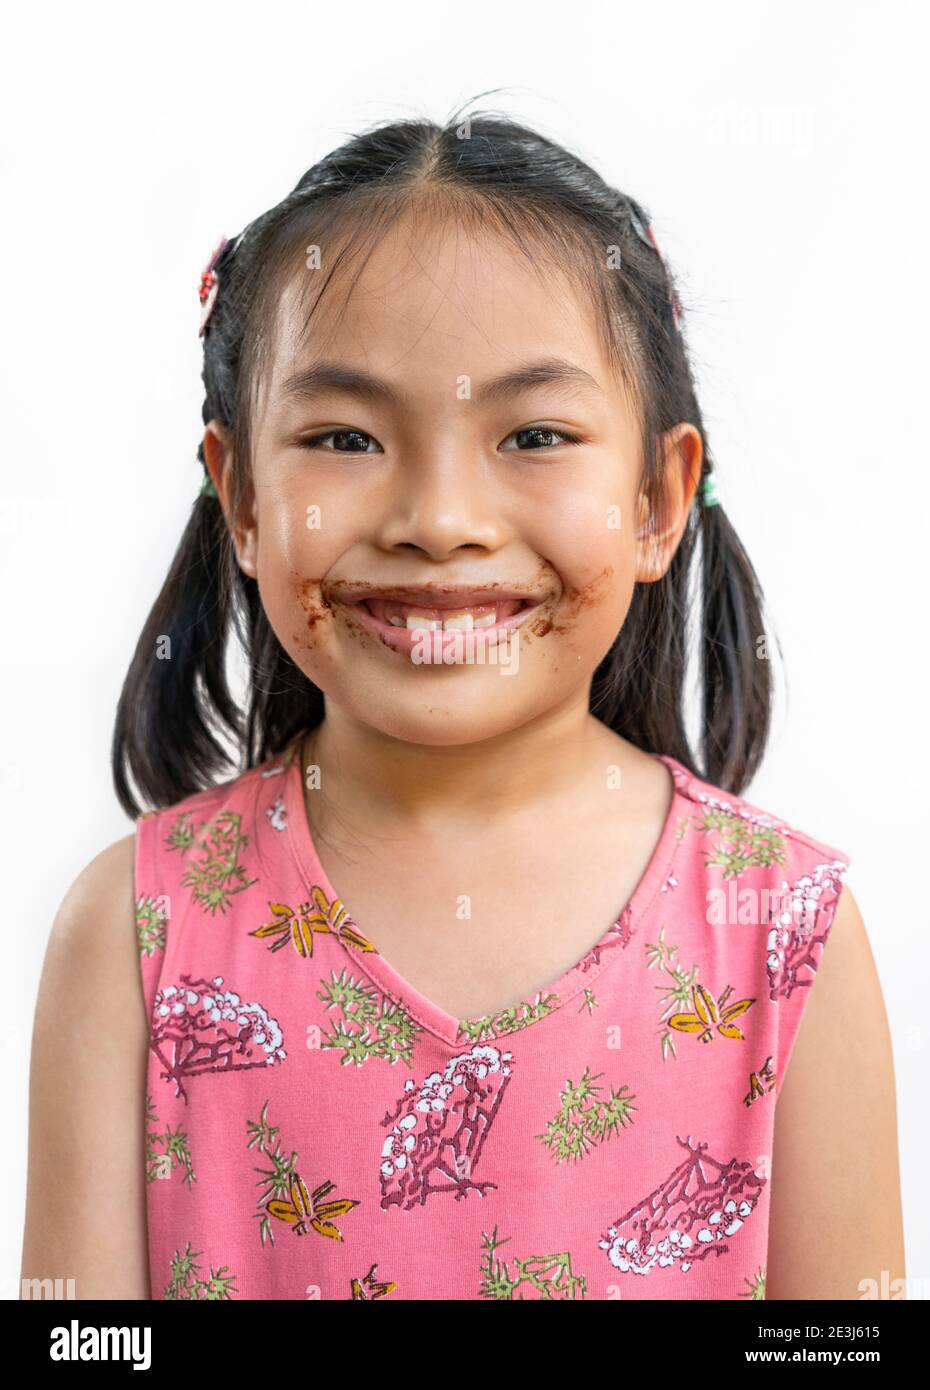 Portrait Asian cute child girl with messy of chocolate around her mouth, big smile on cute face, black hair, wearing beautiful pink dress, isolated im Stock Photo